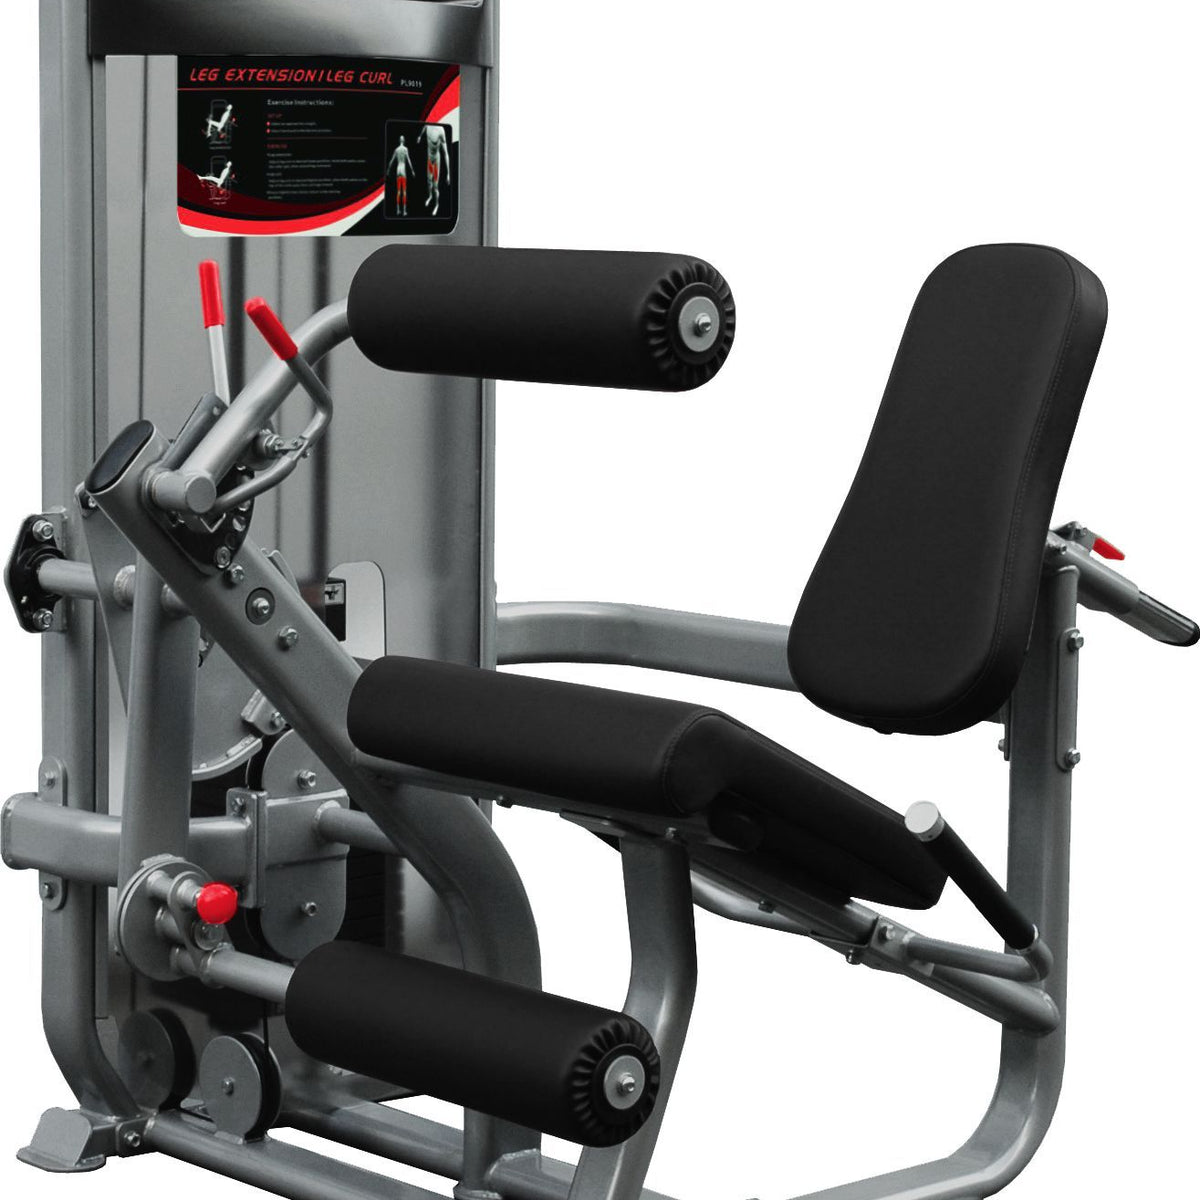 Muscle D Fitness MDD-1007 Dual Function Leg Extension/Prone Leg